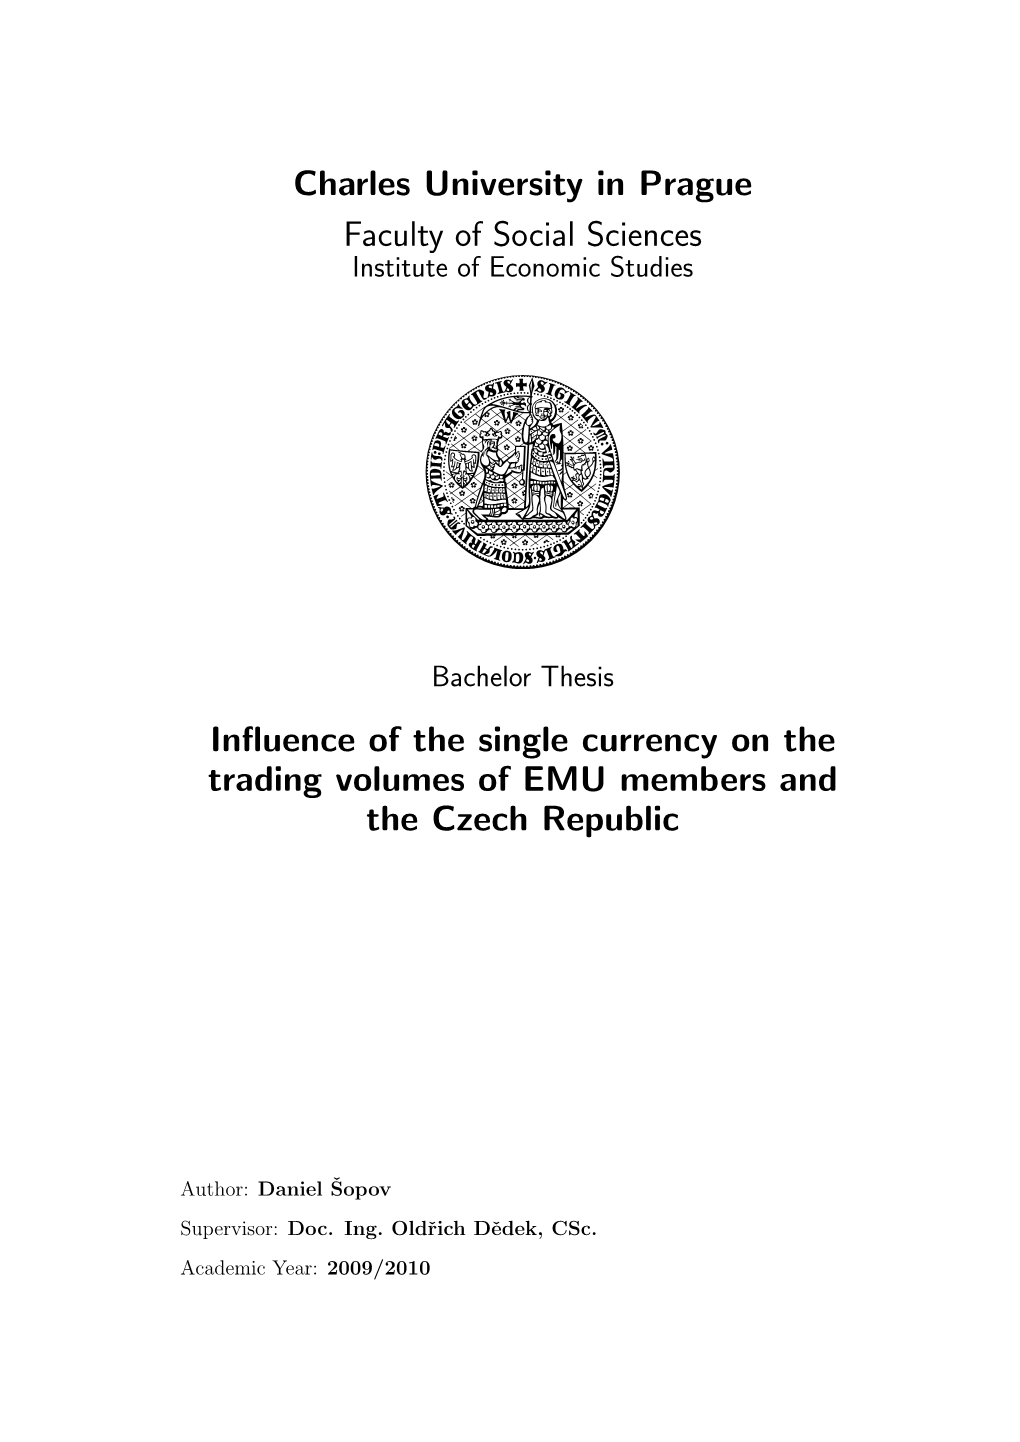 Influence of the Single Currency on the Trading Volumes of EMU Members